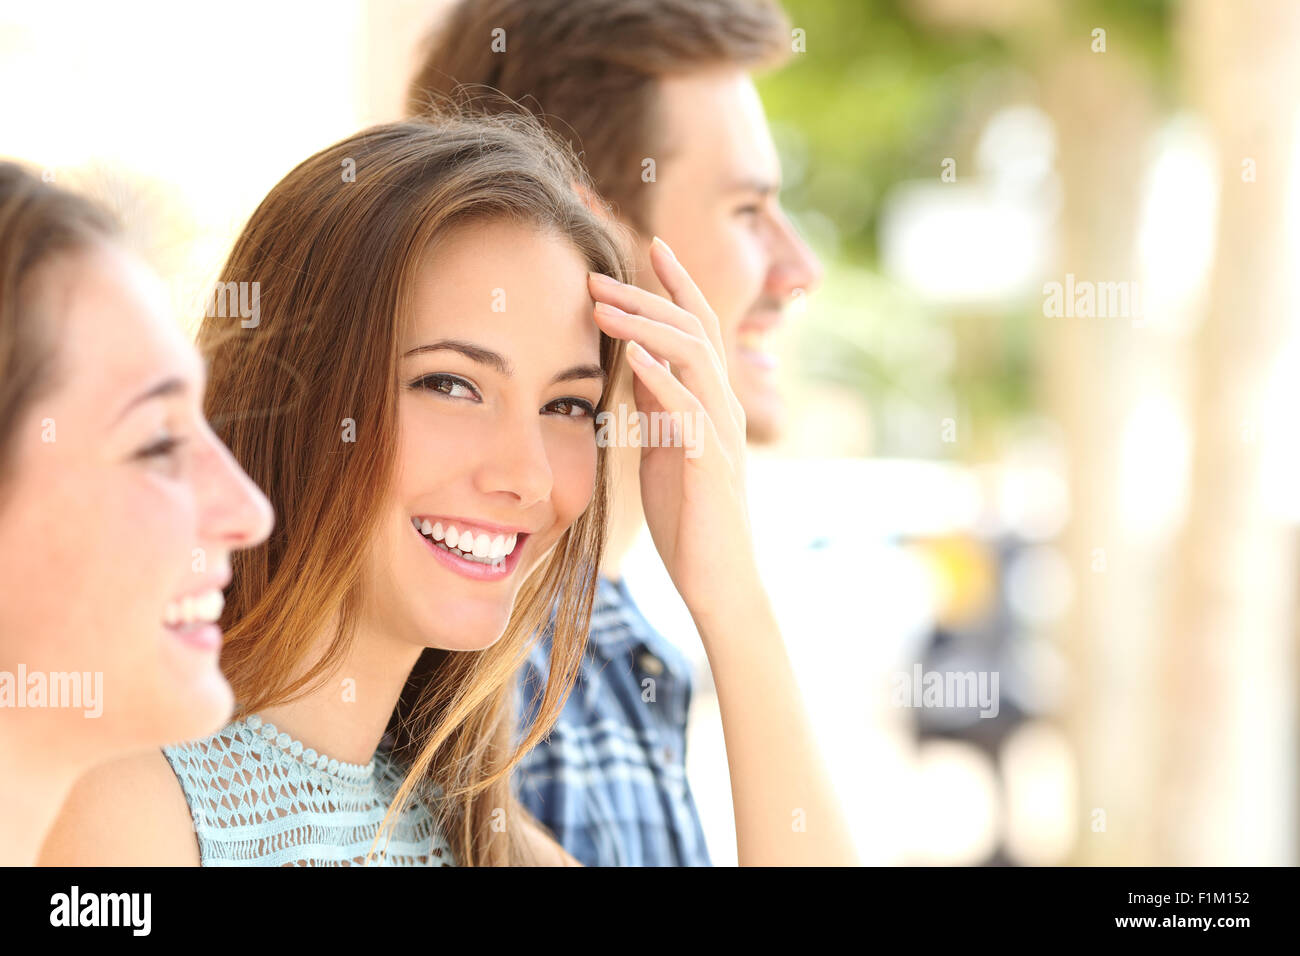 Beauty woman with white smile and teeth between friends in the street Stock Photo